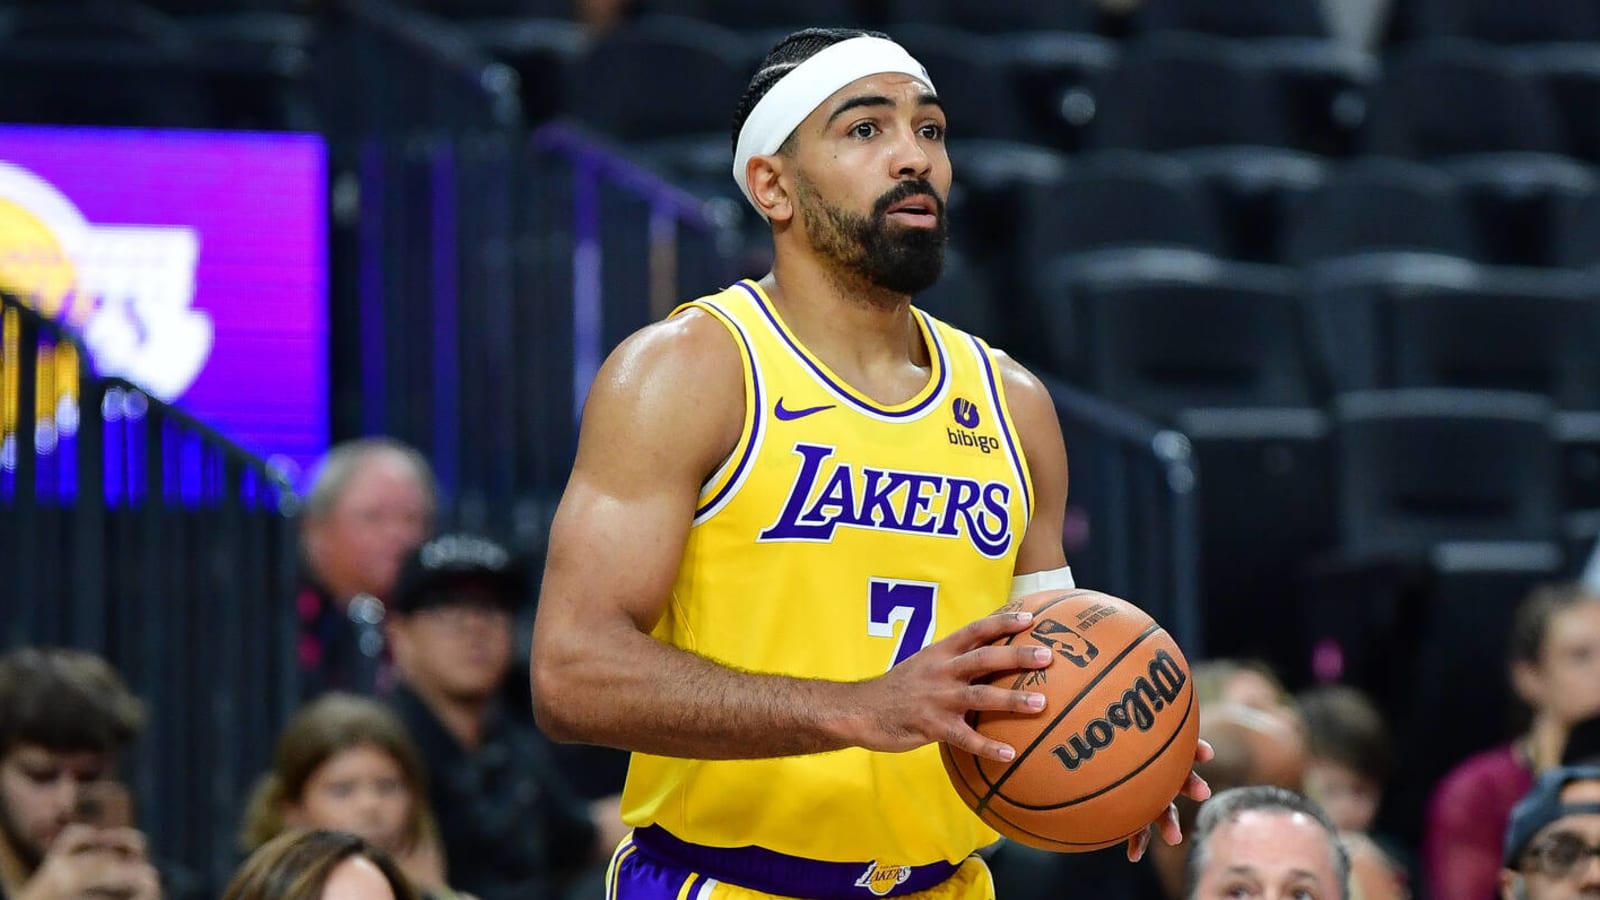 Lakers get bad injury news on player who just returned